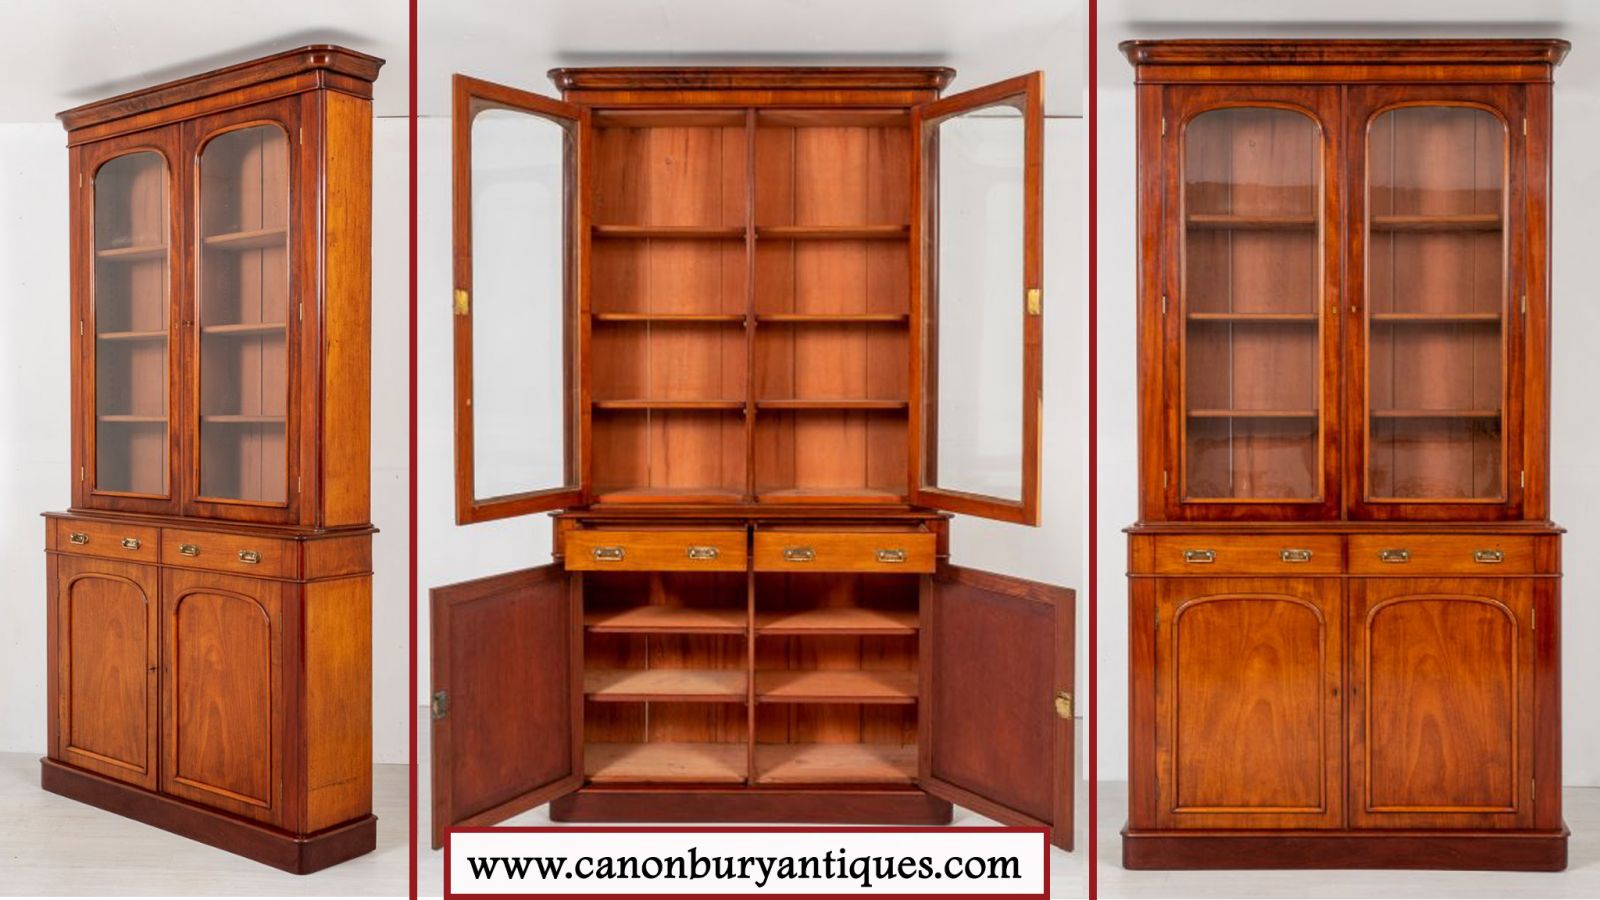 An antique bookcase - perfect for Victorian interiors